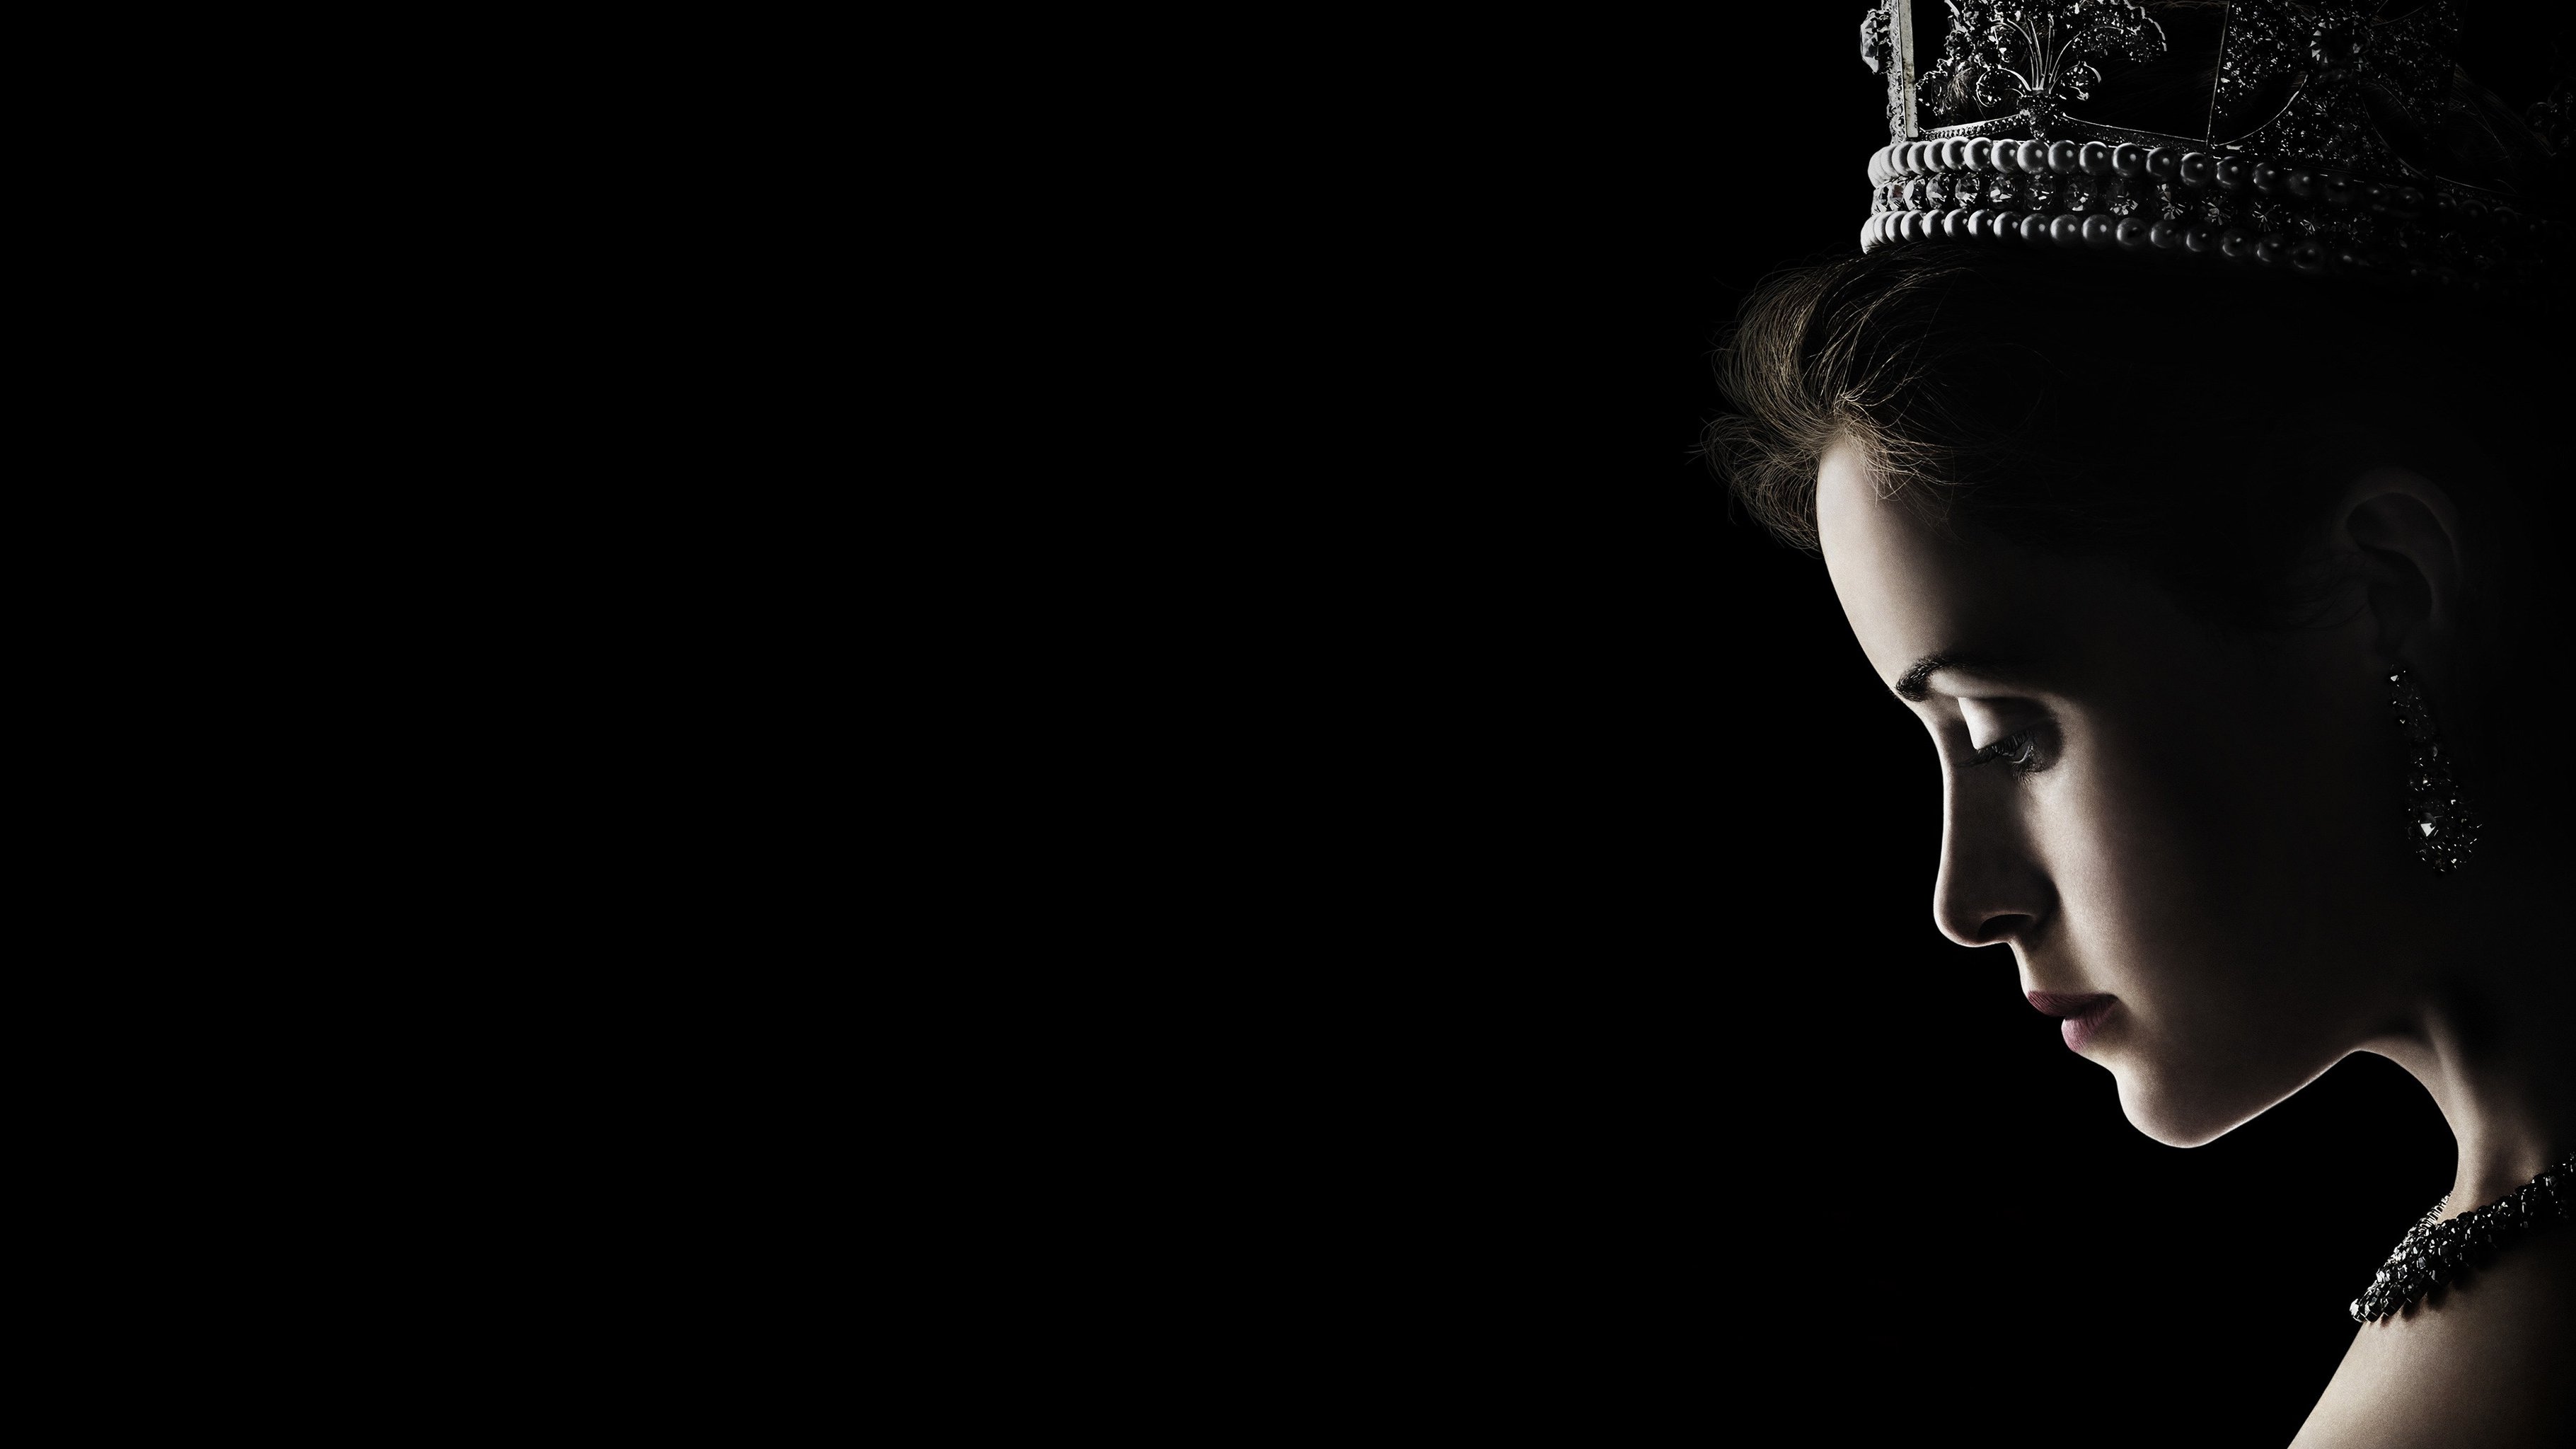 52 The Crown HD Wallpapers | Background Images - Wallpaper Abyss